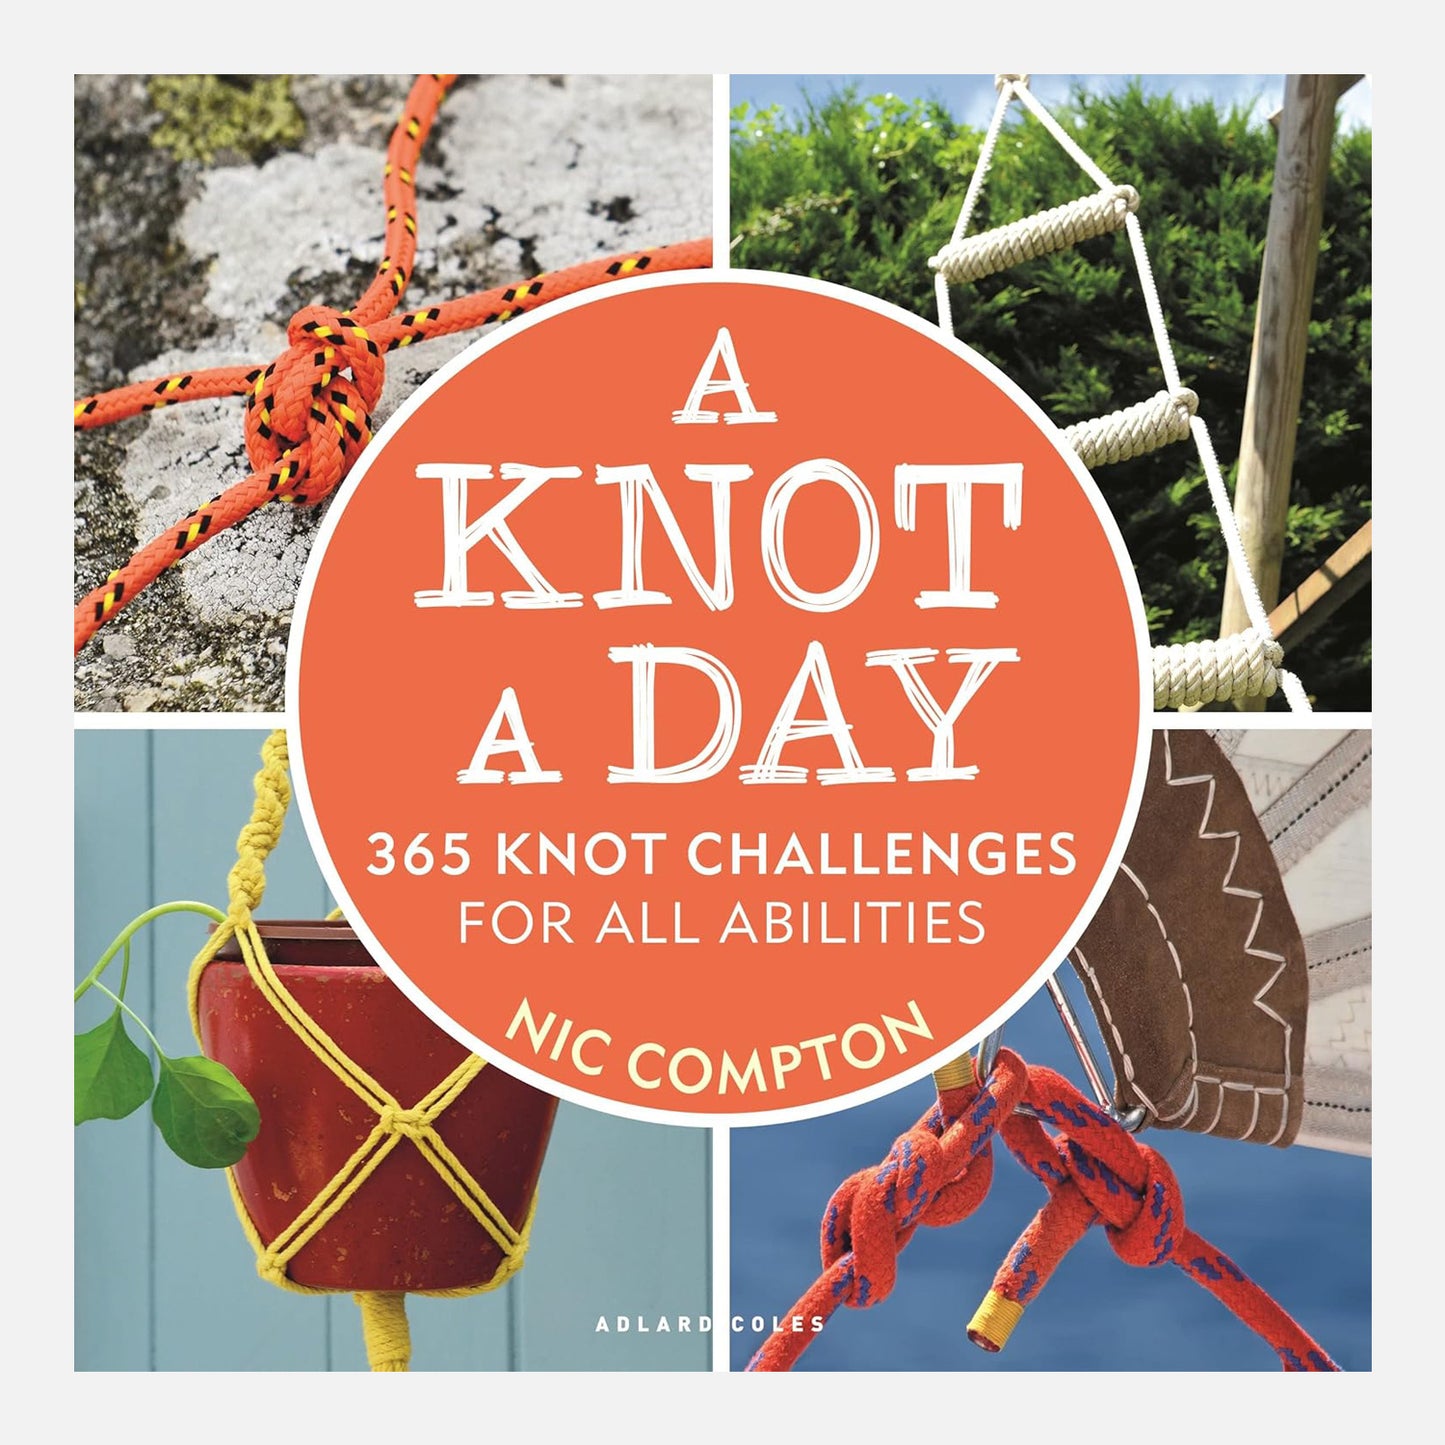 A Knot A Day: 365 Knot Challenges for All Abilities by Nic Compton. Four different knot images showing their multiple uses. From rope ladders, macrame plant holder to traditional knots for sails.